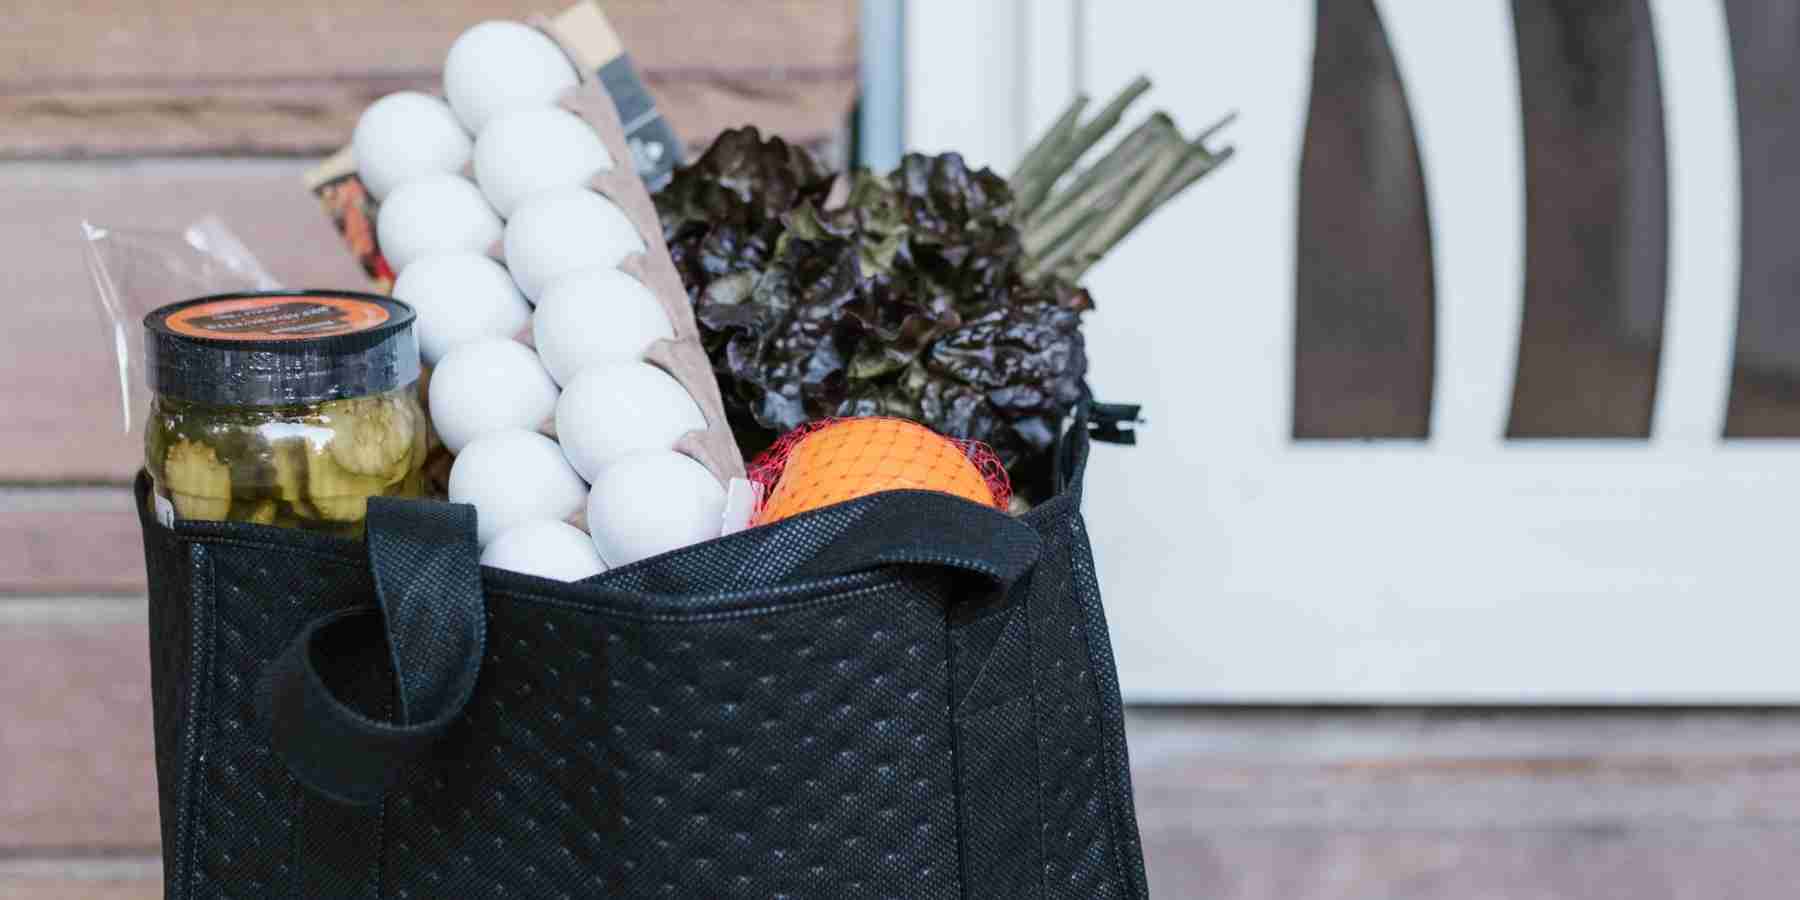 How To Make $500 A Week With Instacart (2022 Guide)